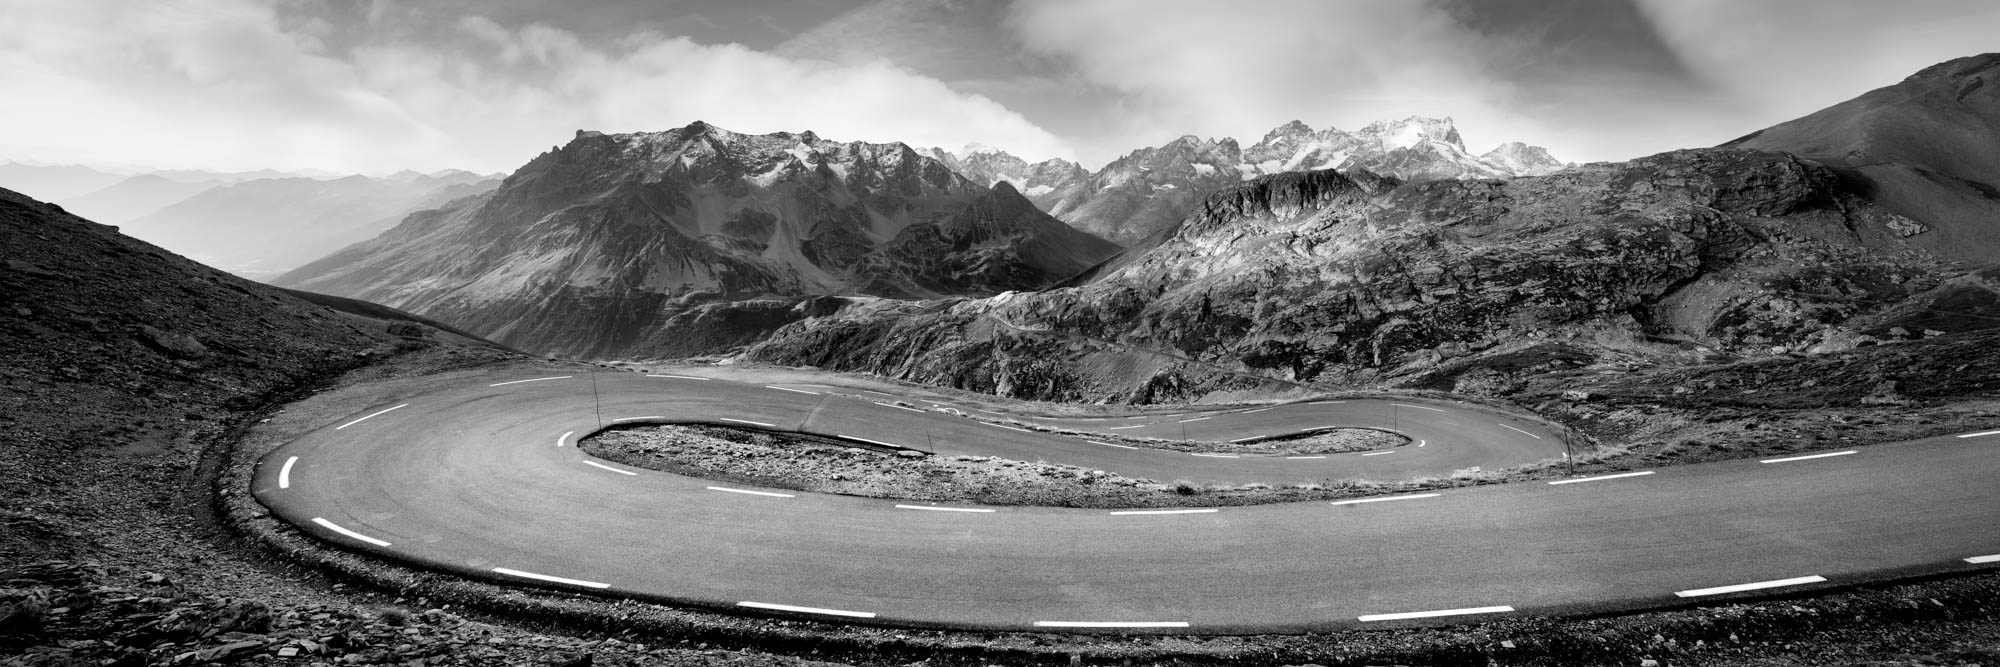 Panorama of the Tour de France route Col Du Galibier in Black and white